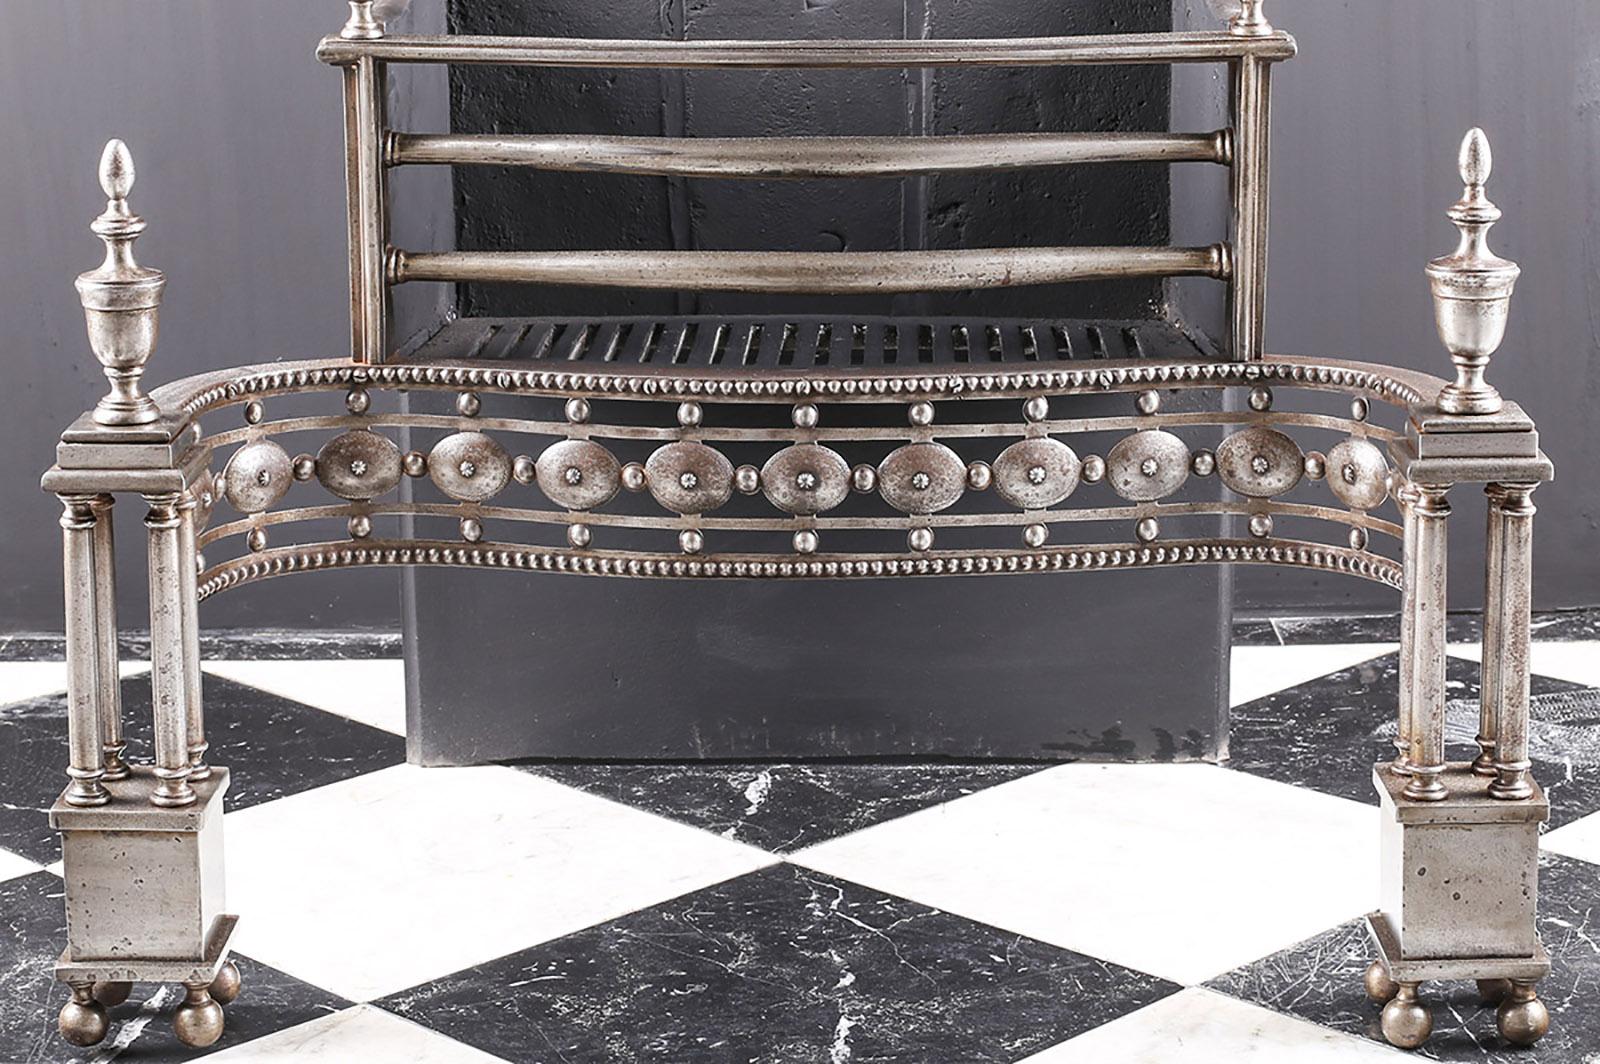 British Fine Grand Georgian Style Steel Cast Iron Engraved Antique Fire Basket, 1870 For Sale